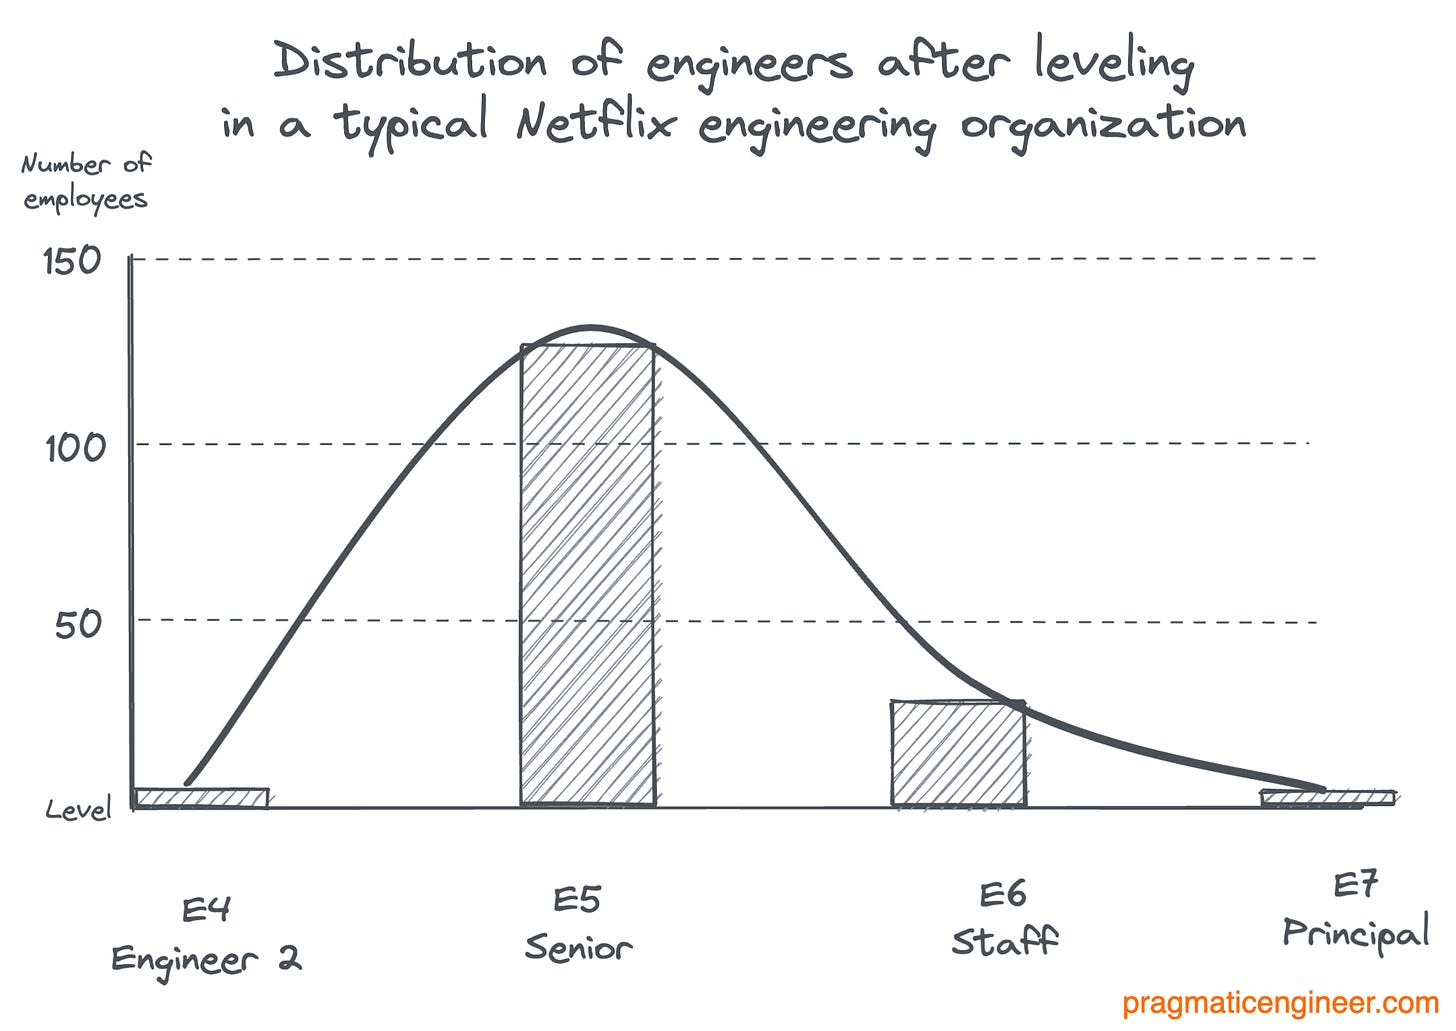 Most software engineers were re-levelled as E5 (Senior engineer) as part of the recent changes. Some got E6 (Staff). Very few got E4 (Engineer 2) and E7 (Principal) was the rarest levels of all.